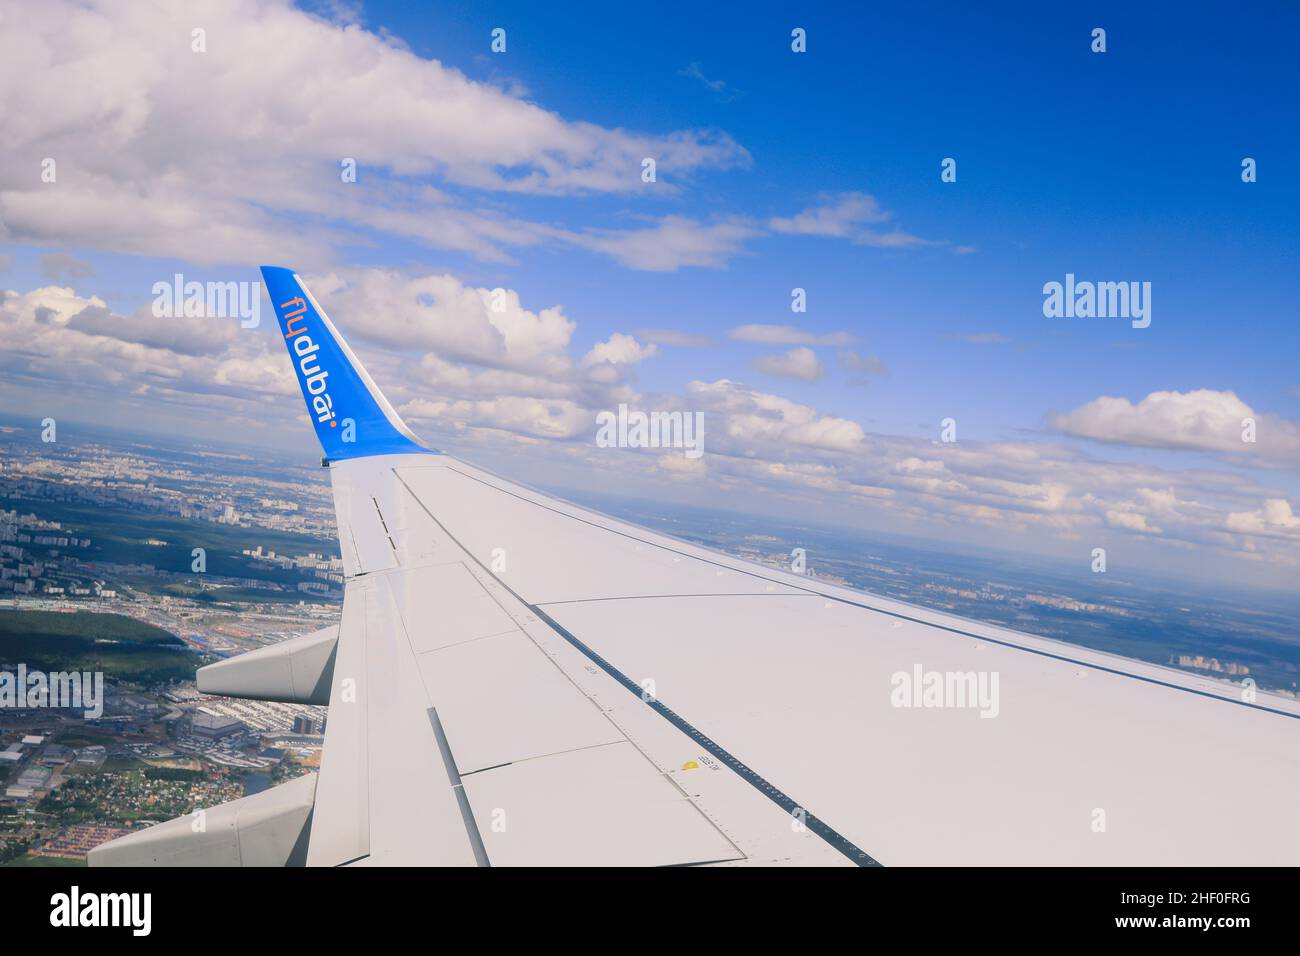 Dubai, United Arab Emirates - June 10, 2021: Window View to the Aircraft Wing and Cloudy Blue Sky Stock Photo